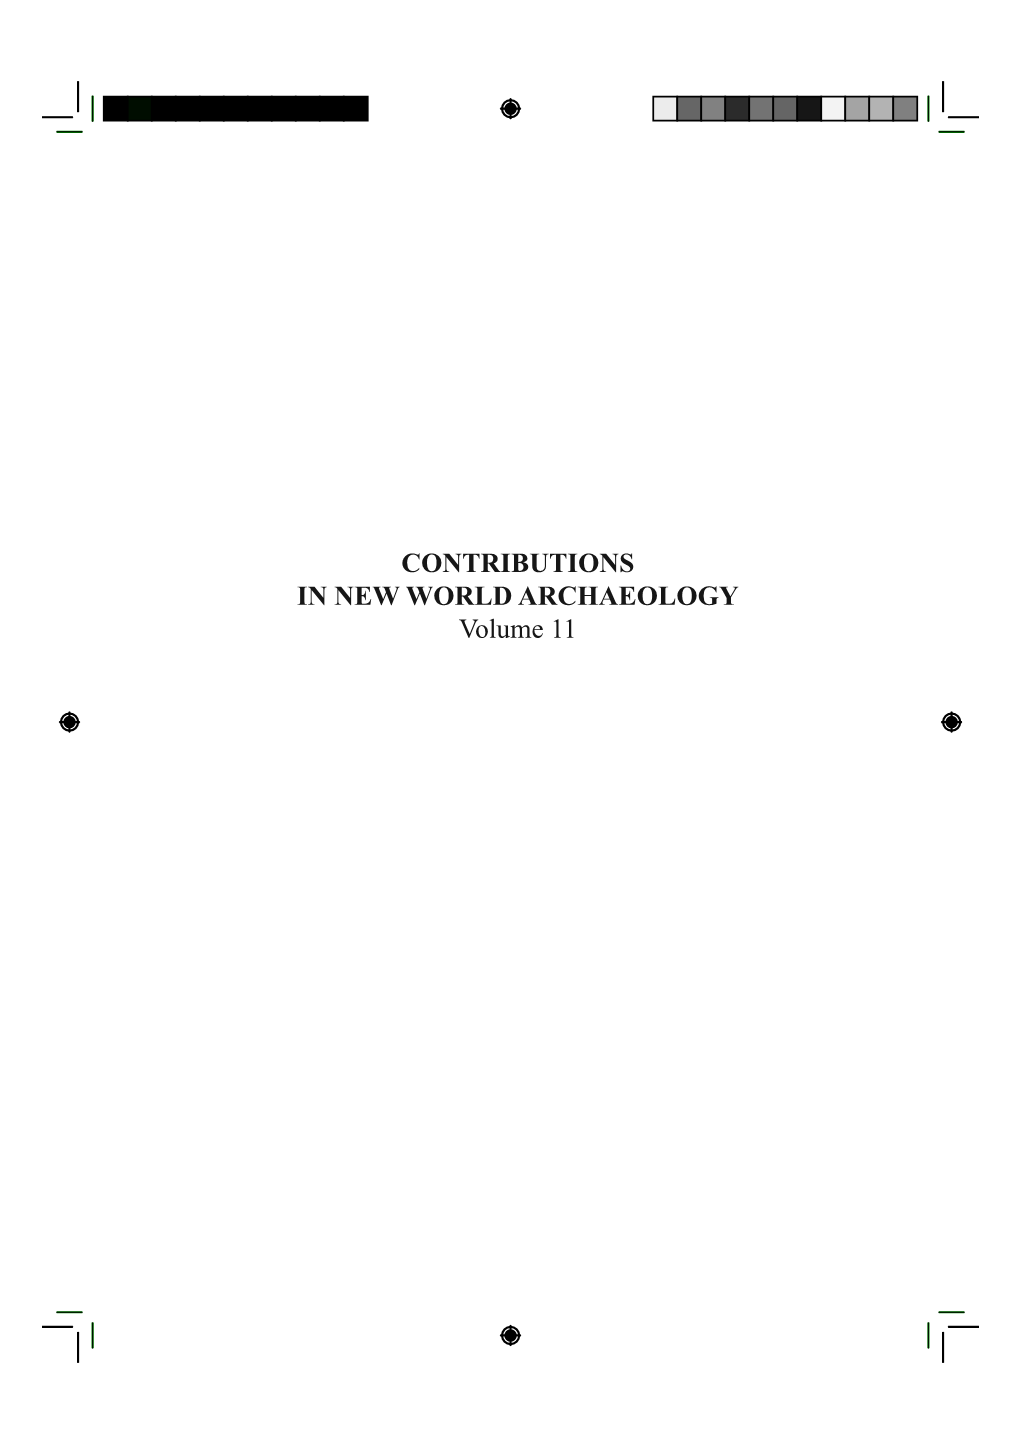 CONTRIBUTIONS in NEW WORLD ARCHAEOLOGY Volume 11